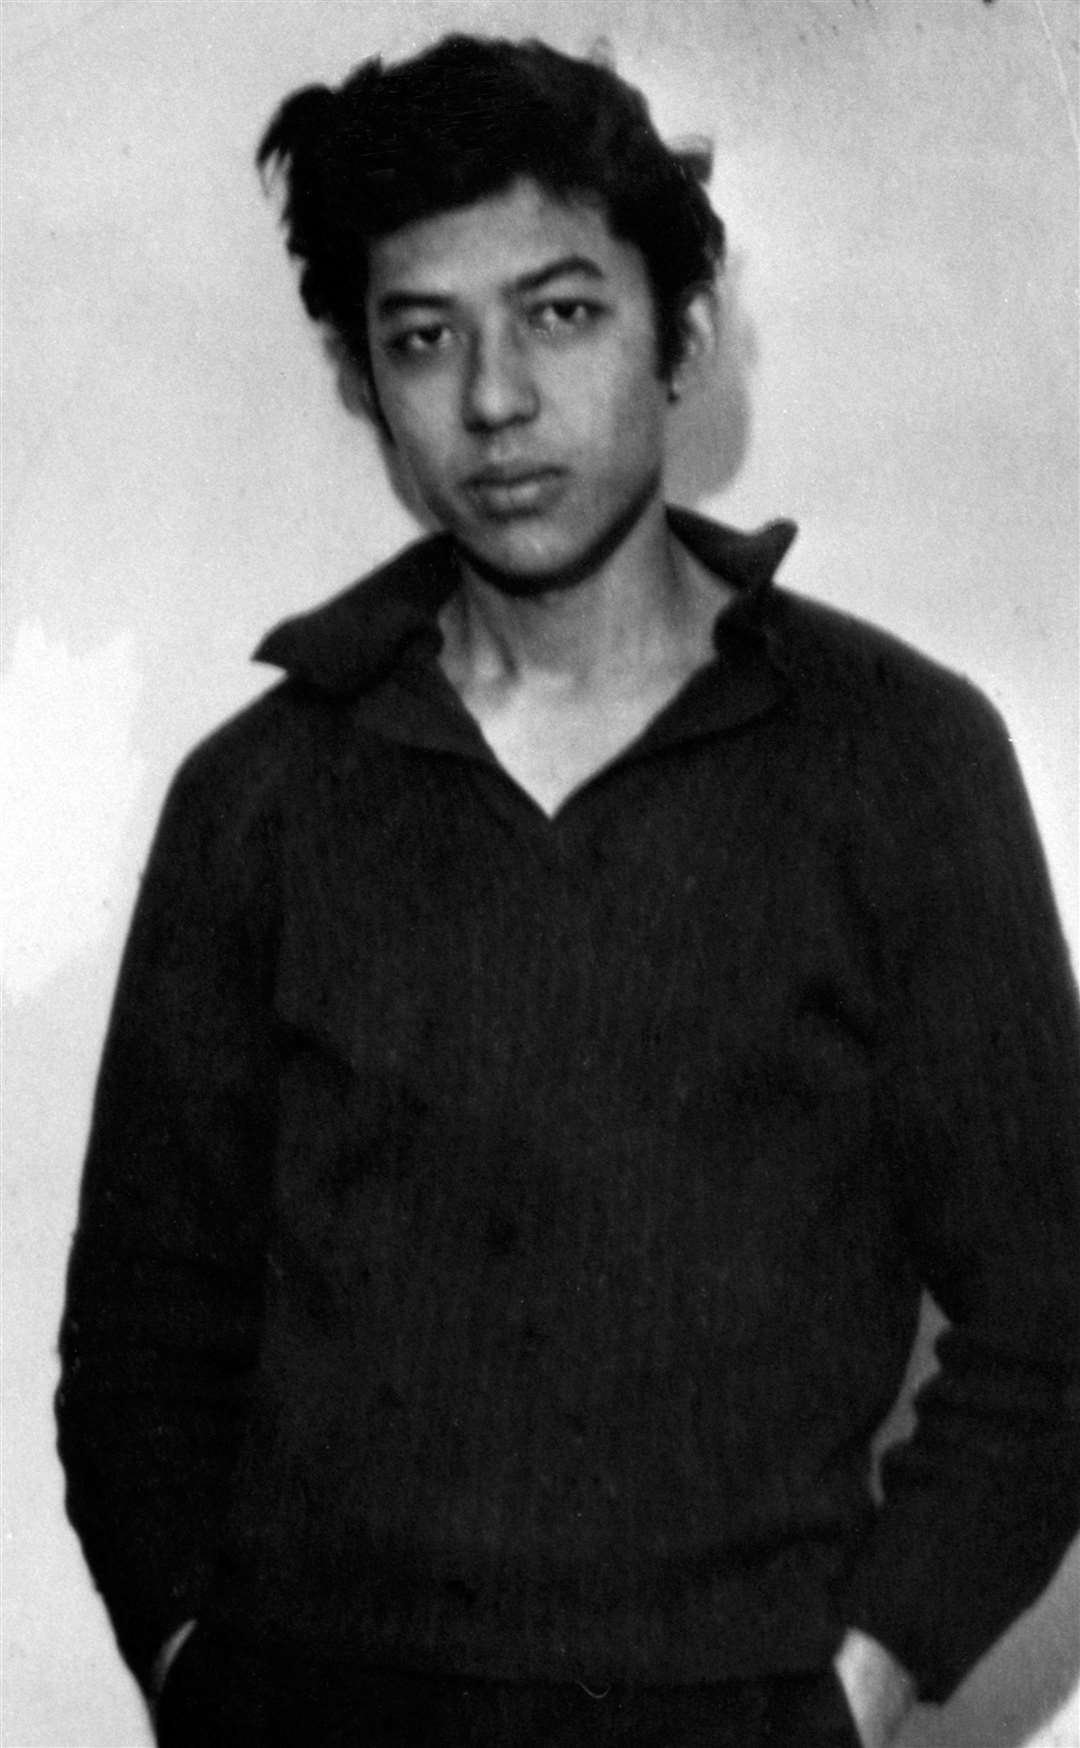 Nizamodeen Hosein, pictured aged 22 (PA Archive/PA Images)